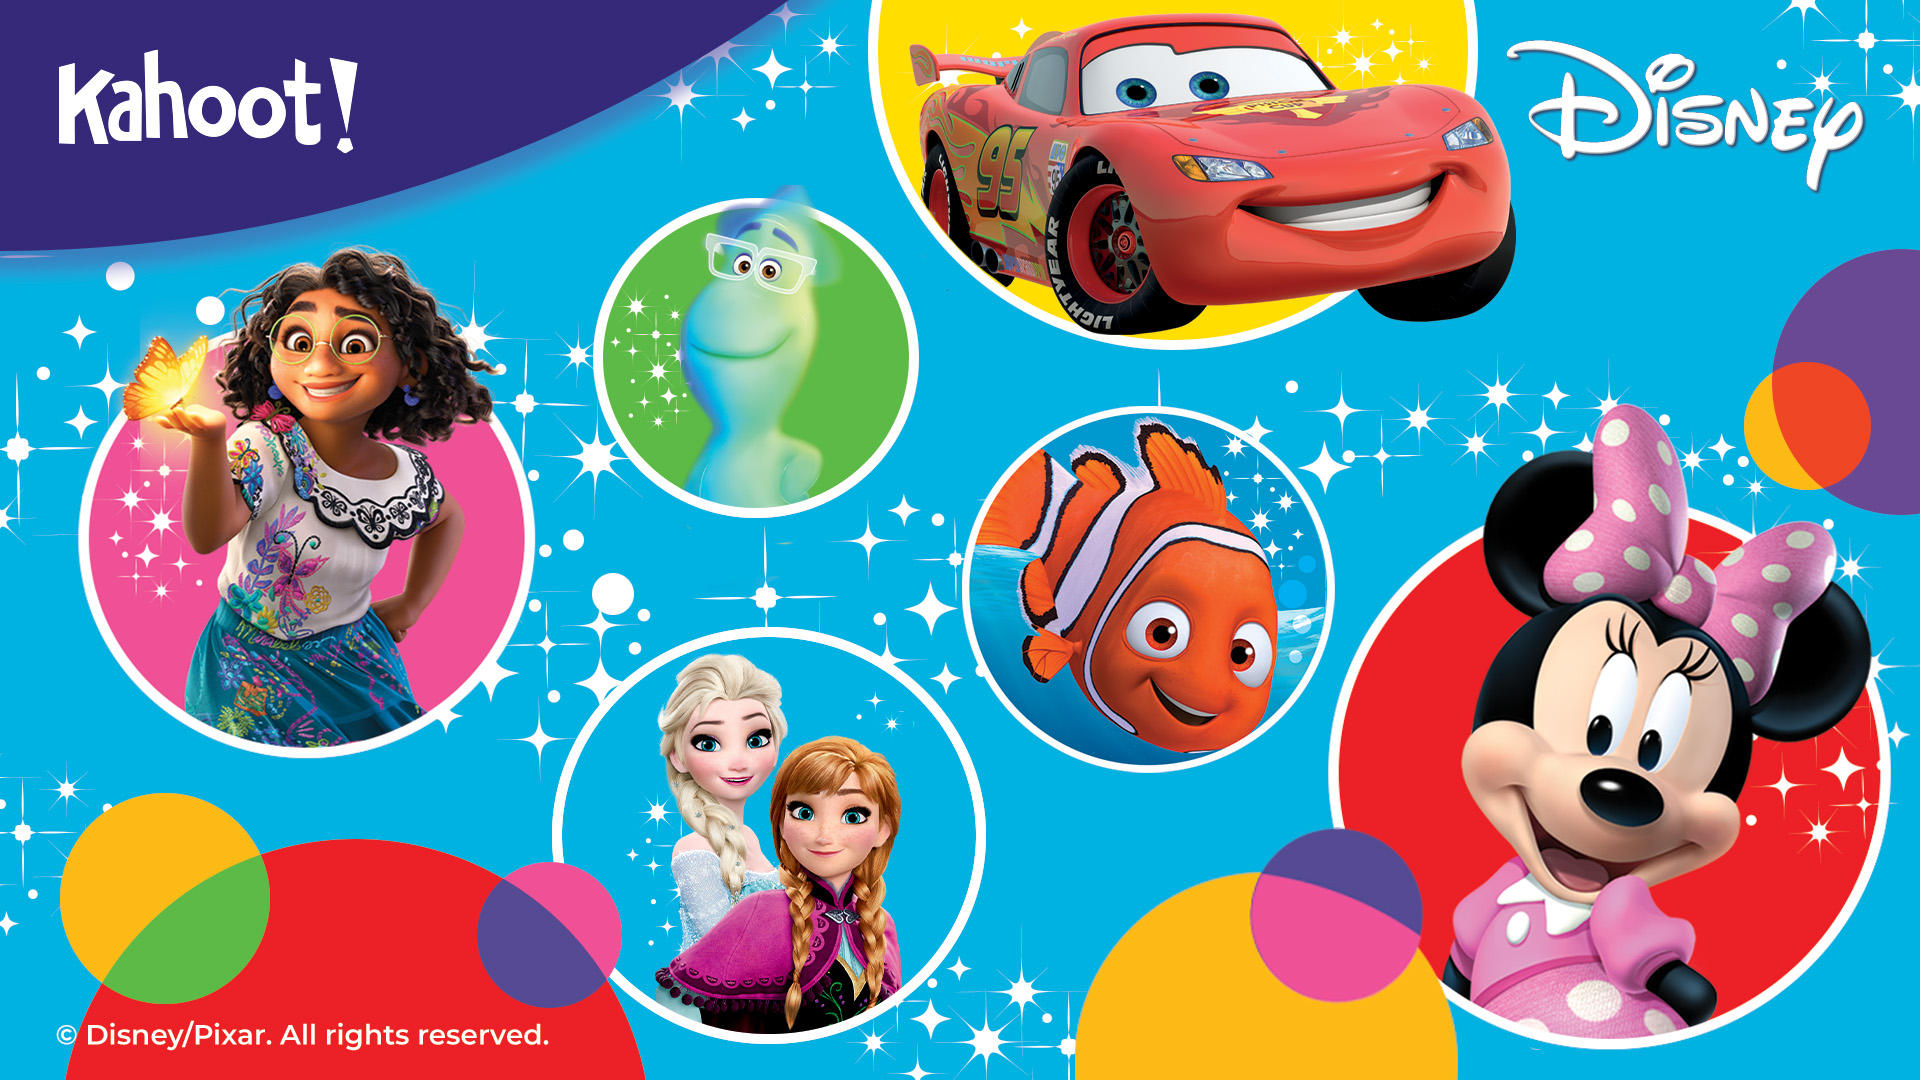 New Disney Kahoot! collections to bring magic to learning